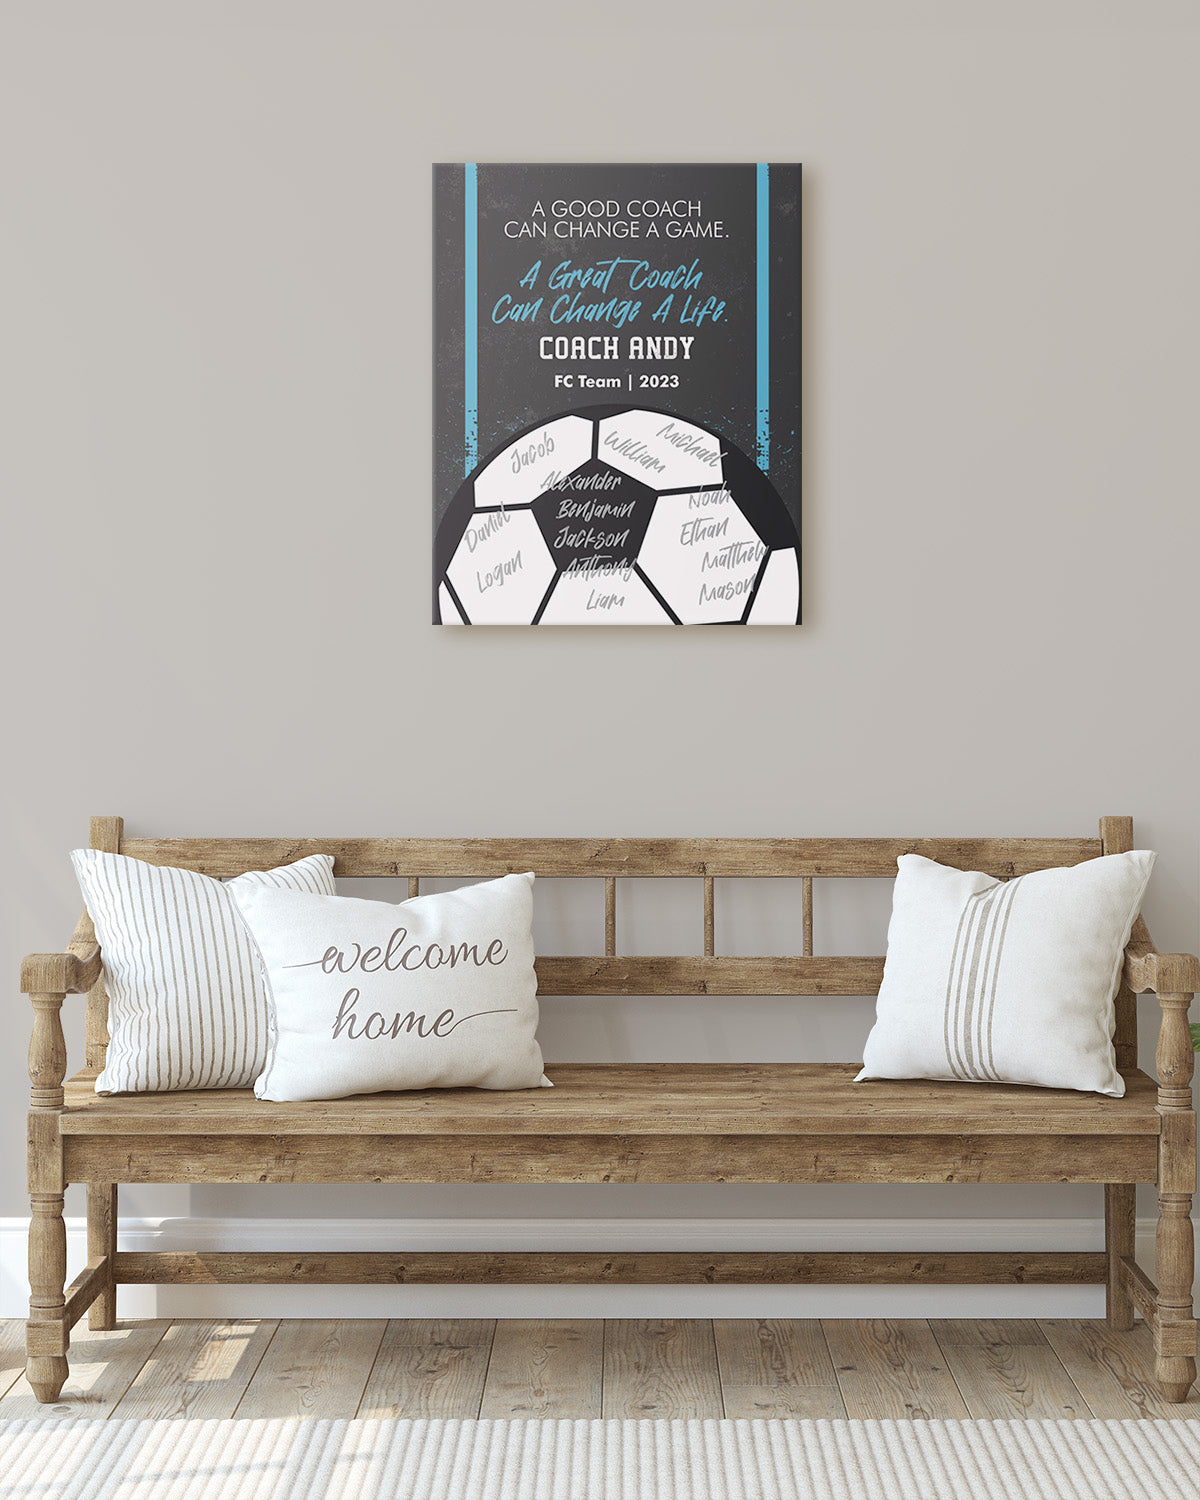 Soccer Coach Appreciation Gift - Customize With Athlete Names, Coach's Names, Team Name, Year or Season - Motivational Sports Wall Art - Coach's Quote